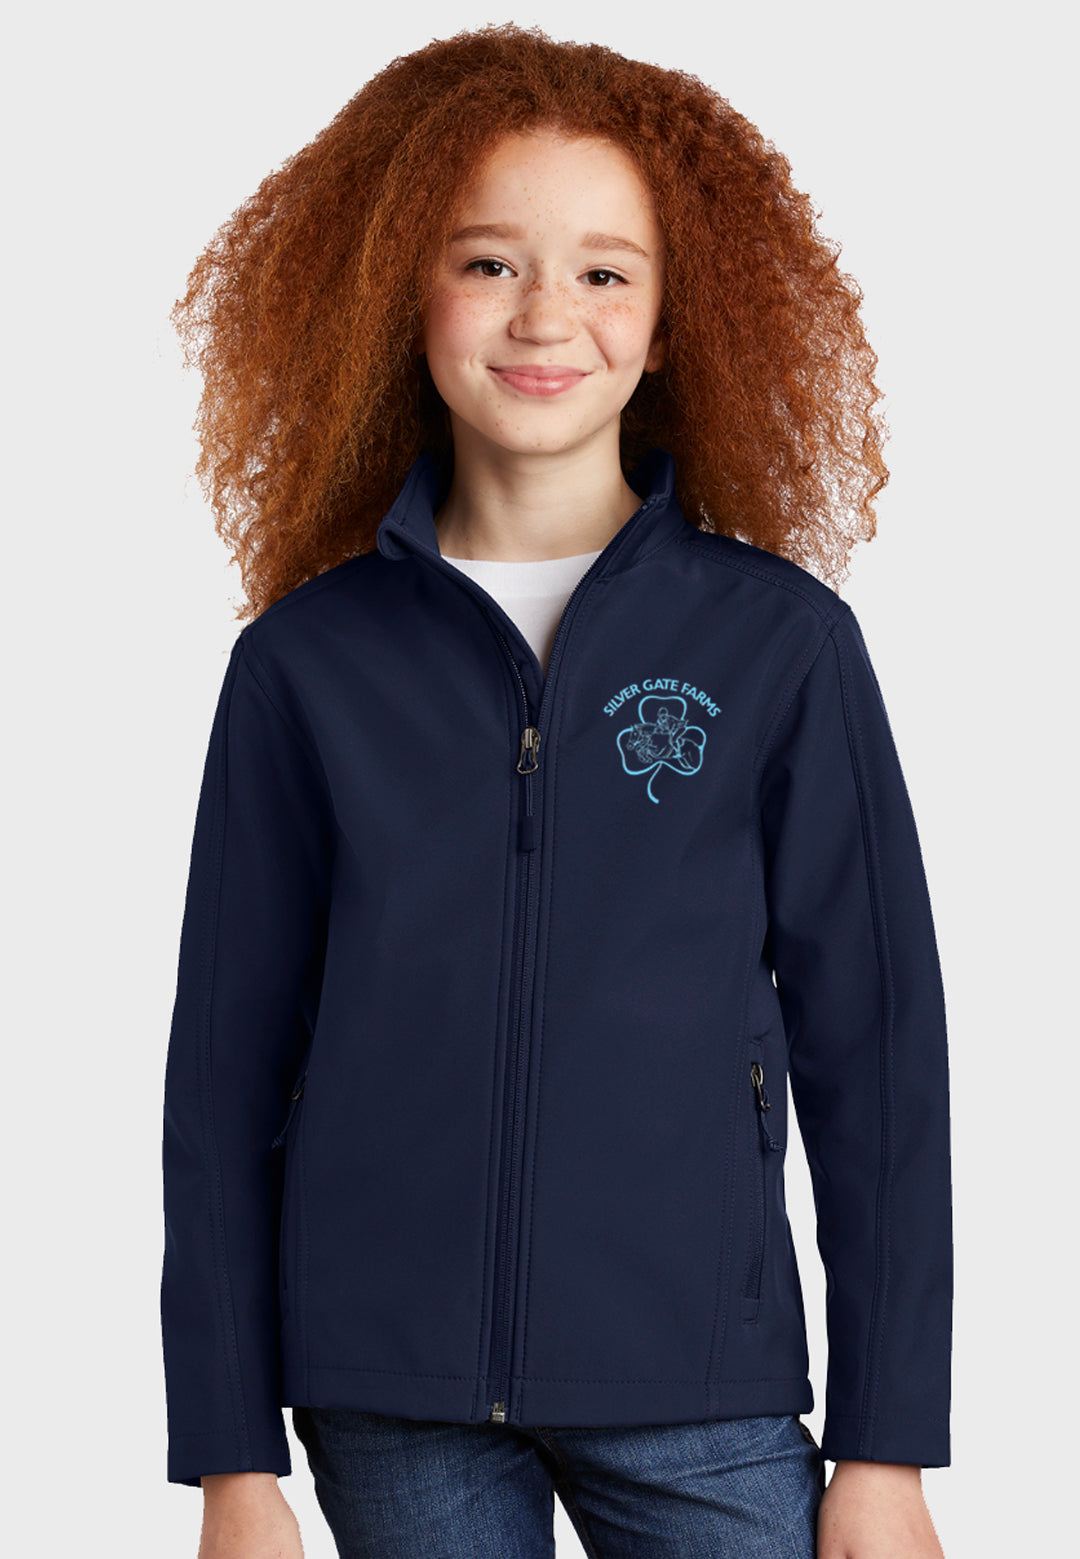 Silver Gate Farms Port Authority® Youth Core Soft Shell Jacket - Navy